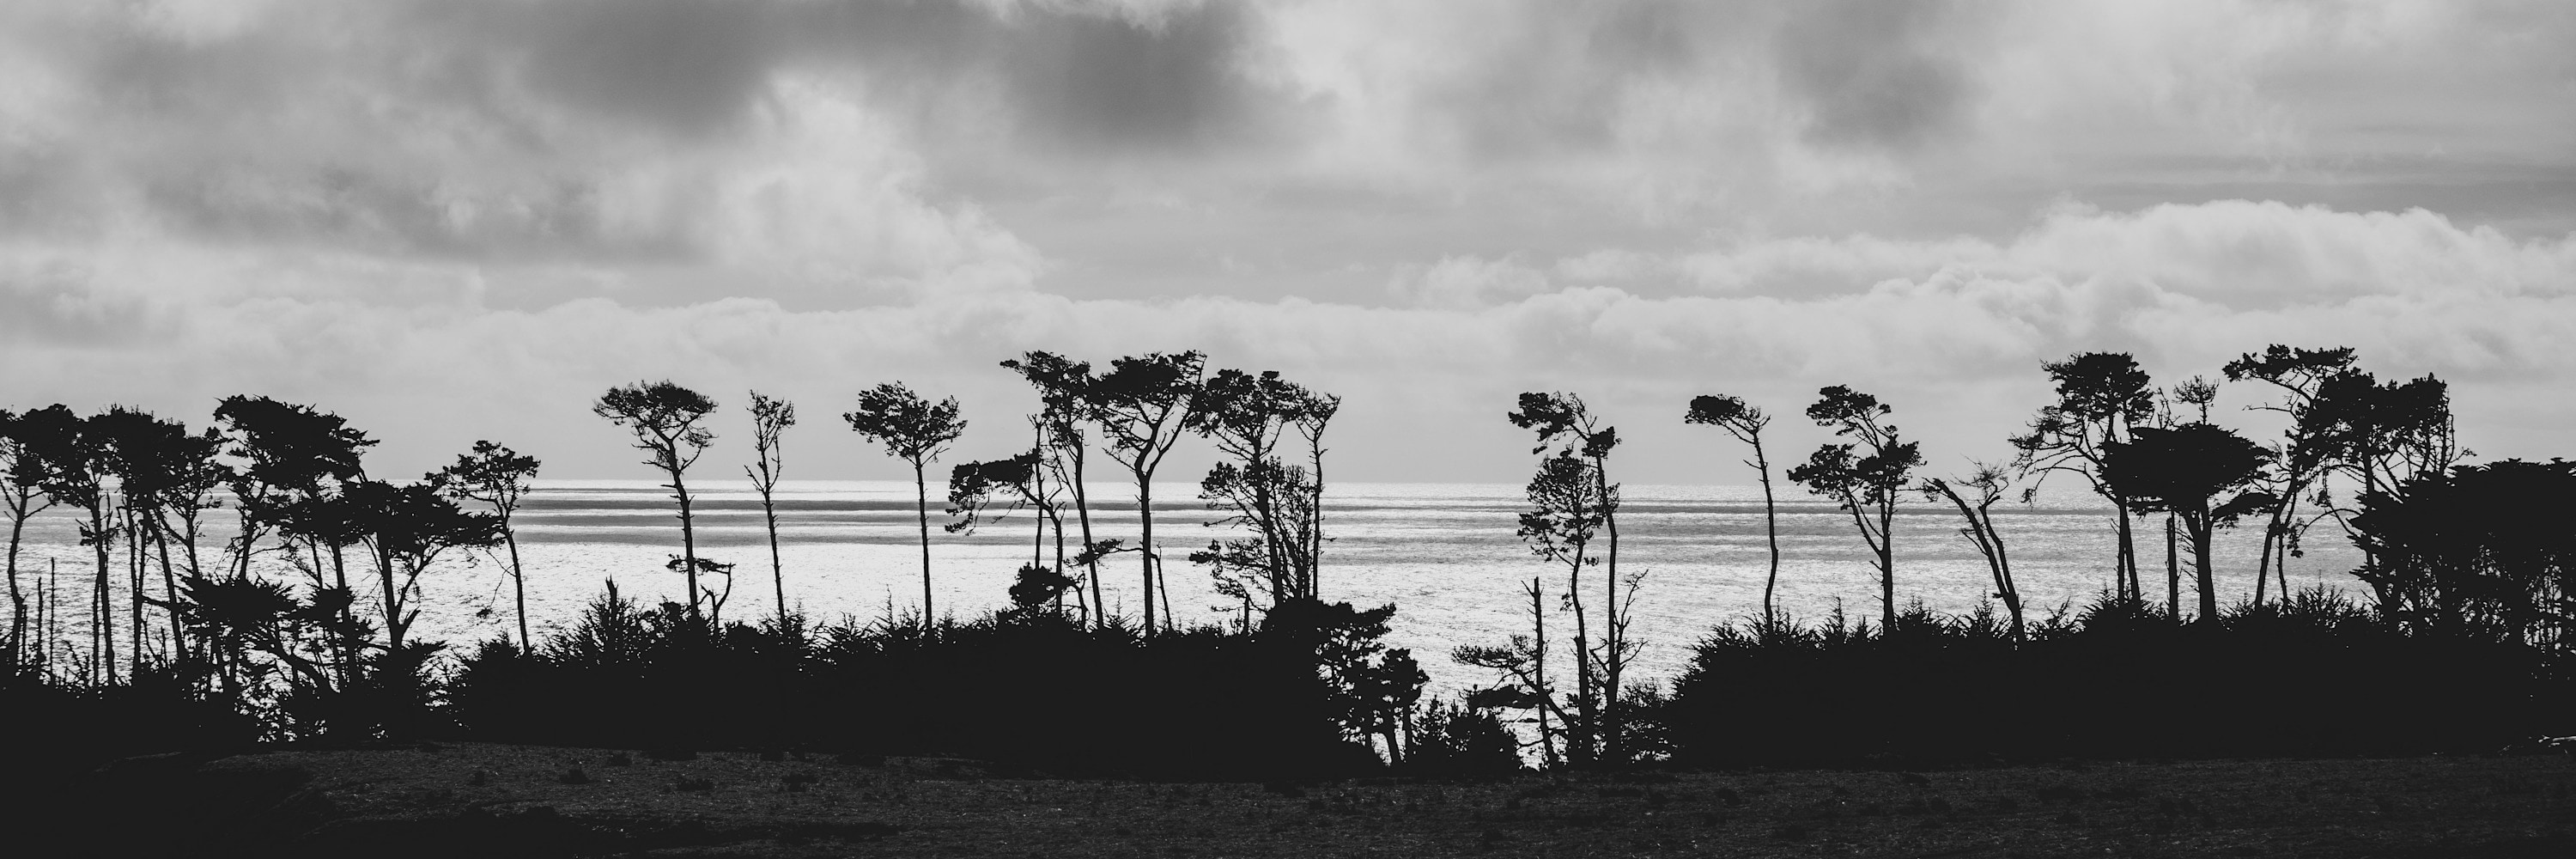 
        <div class='title'>
          Black and white silhouette shot of trees on beach with cloudy sky
        </div>
       
        <div class='description'>
          
        </div>
      